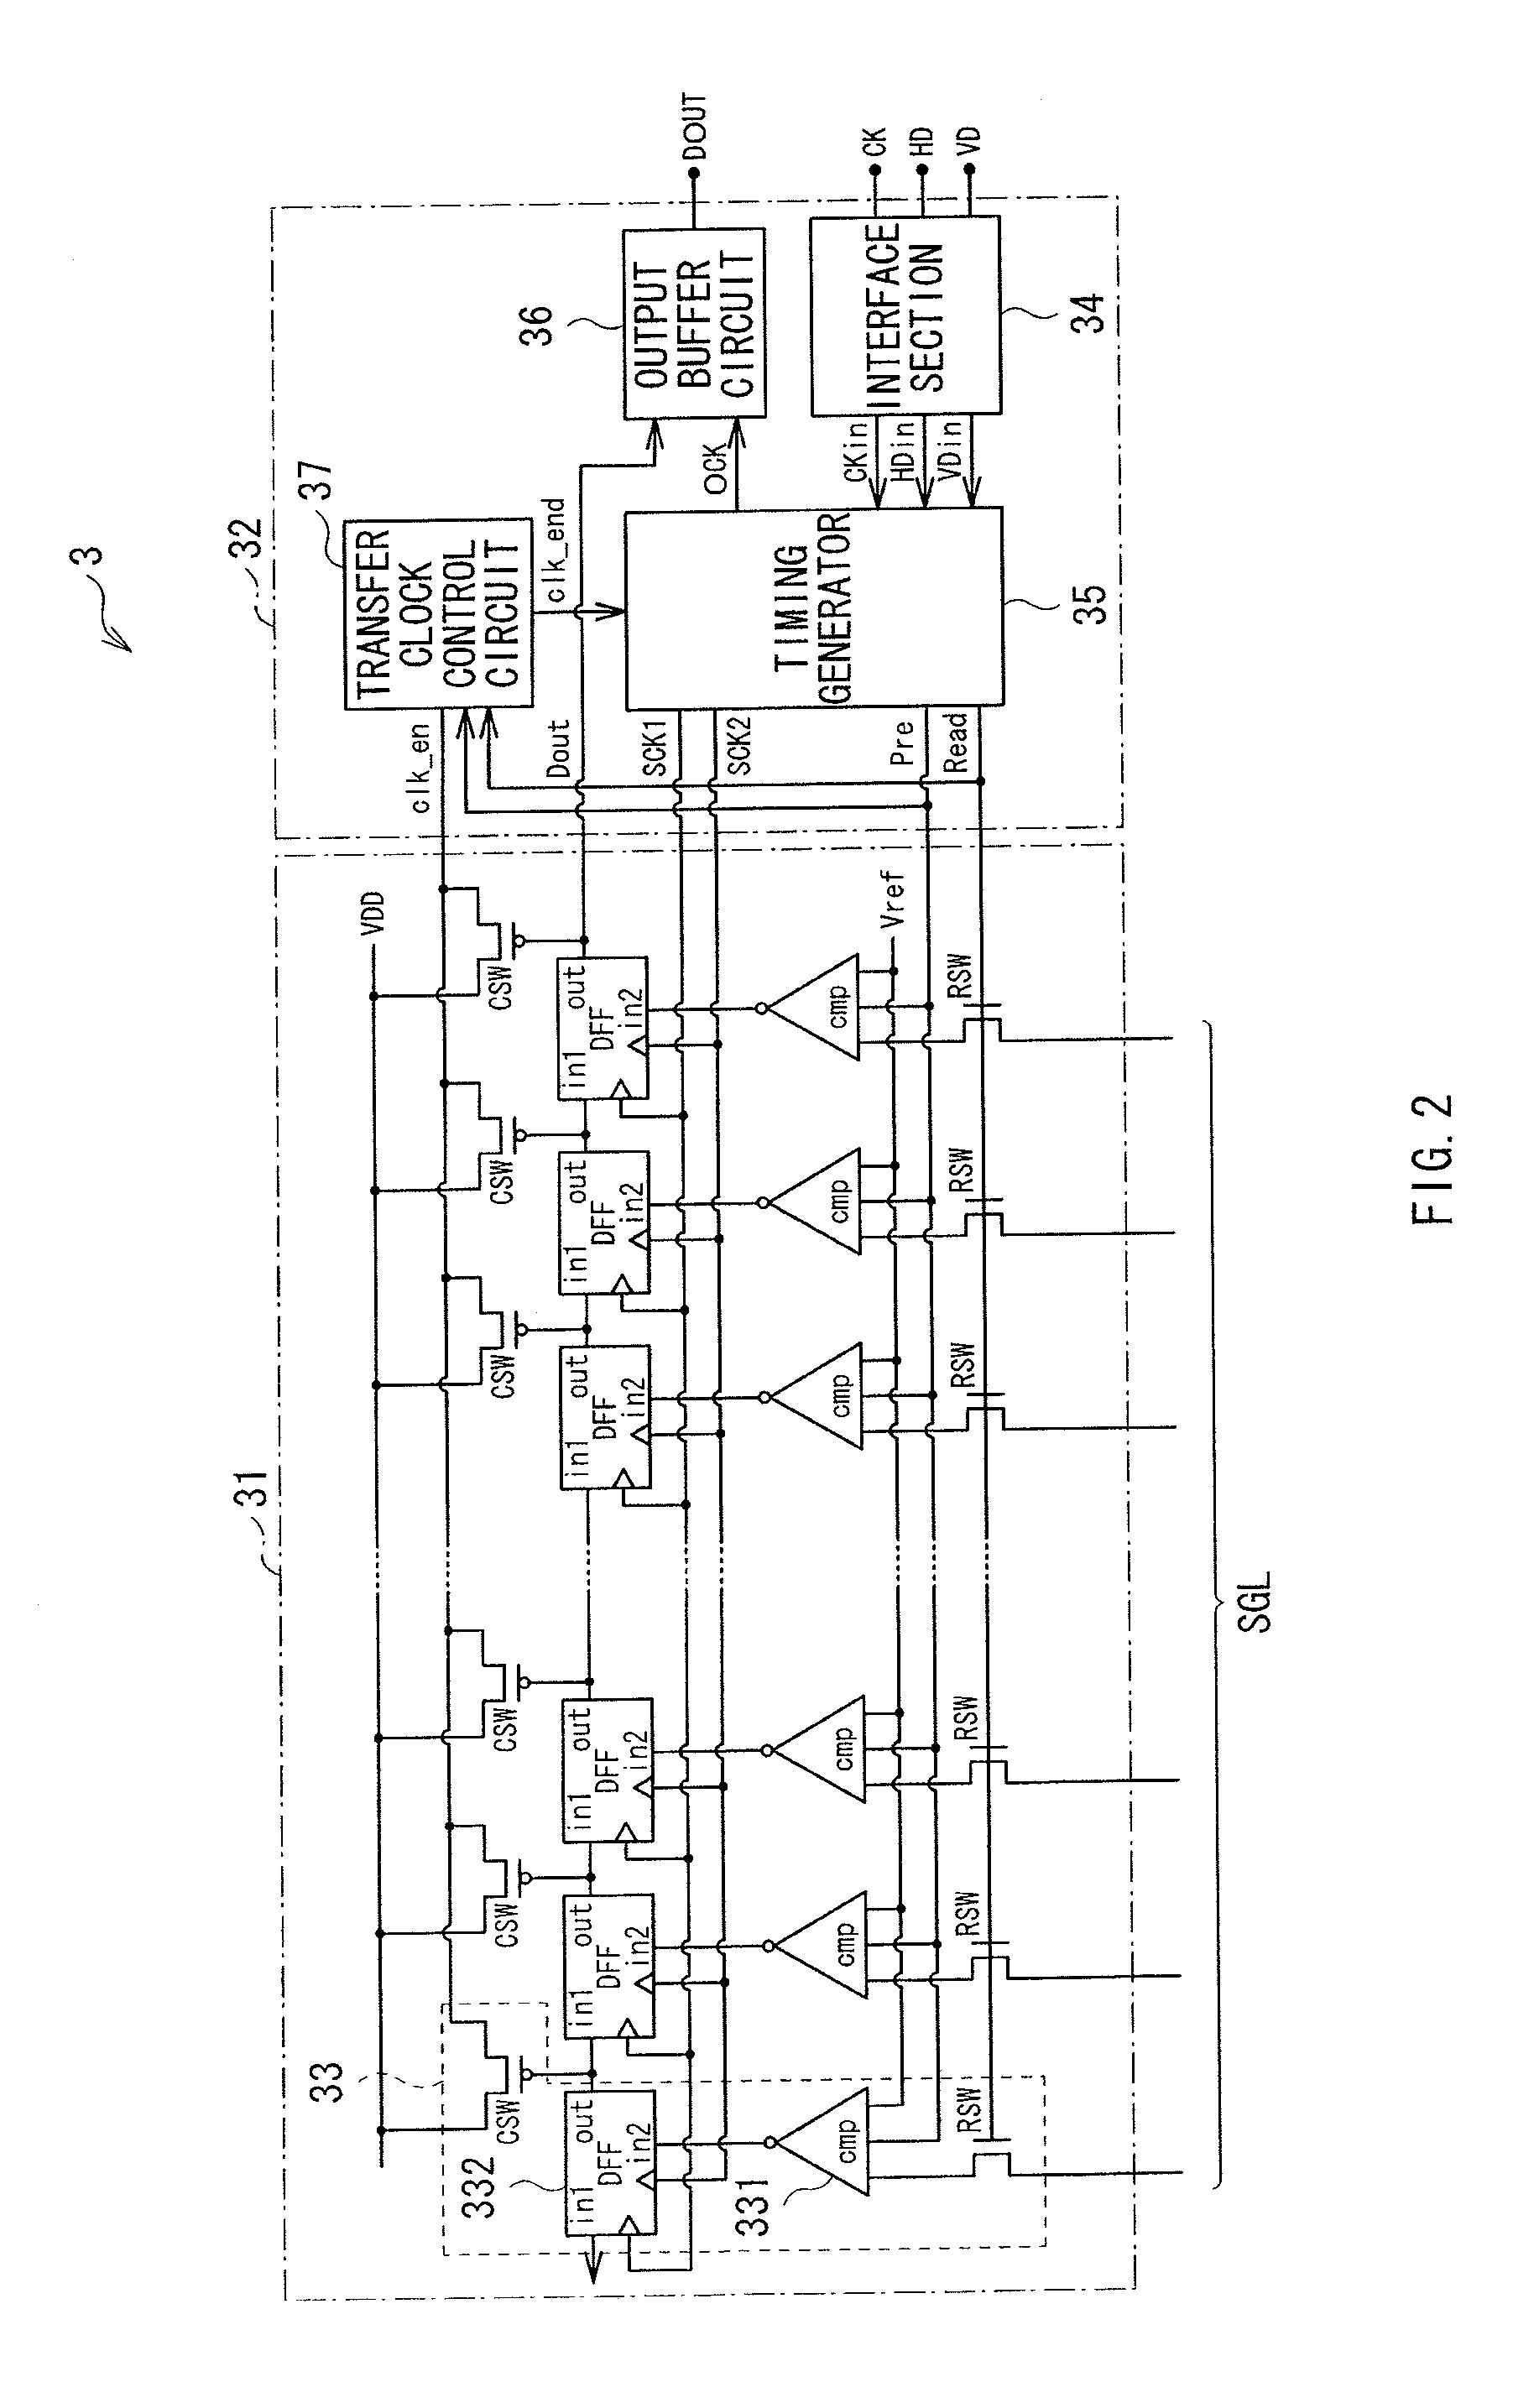 Display, touch panel and electronic device